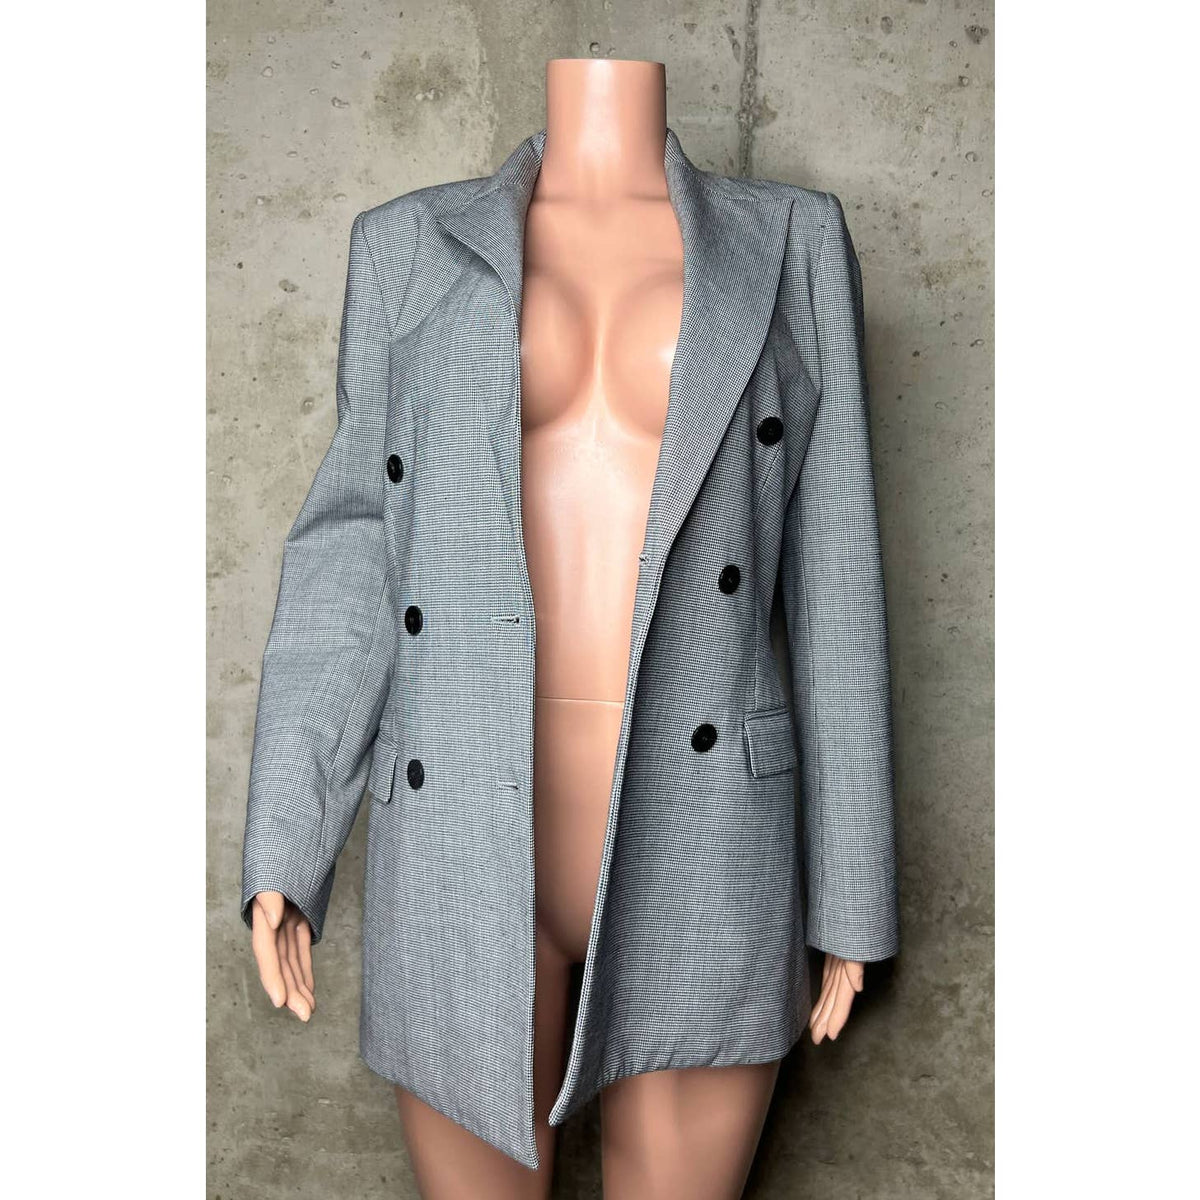 Theory Hounds Portland DB Tailor Double Breasted Jacket Sz. 6